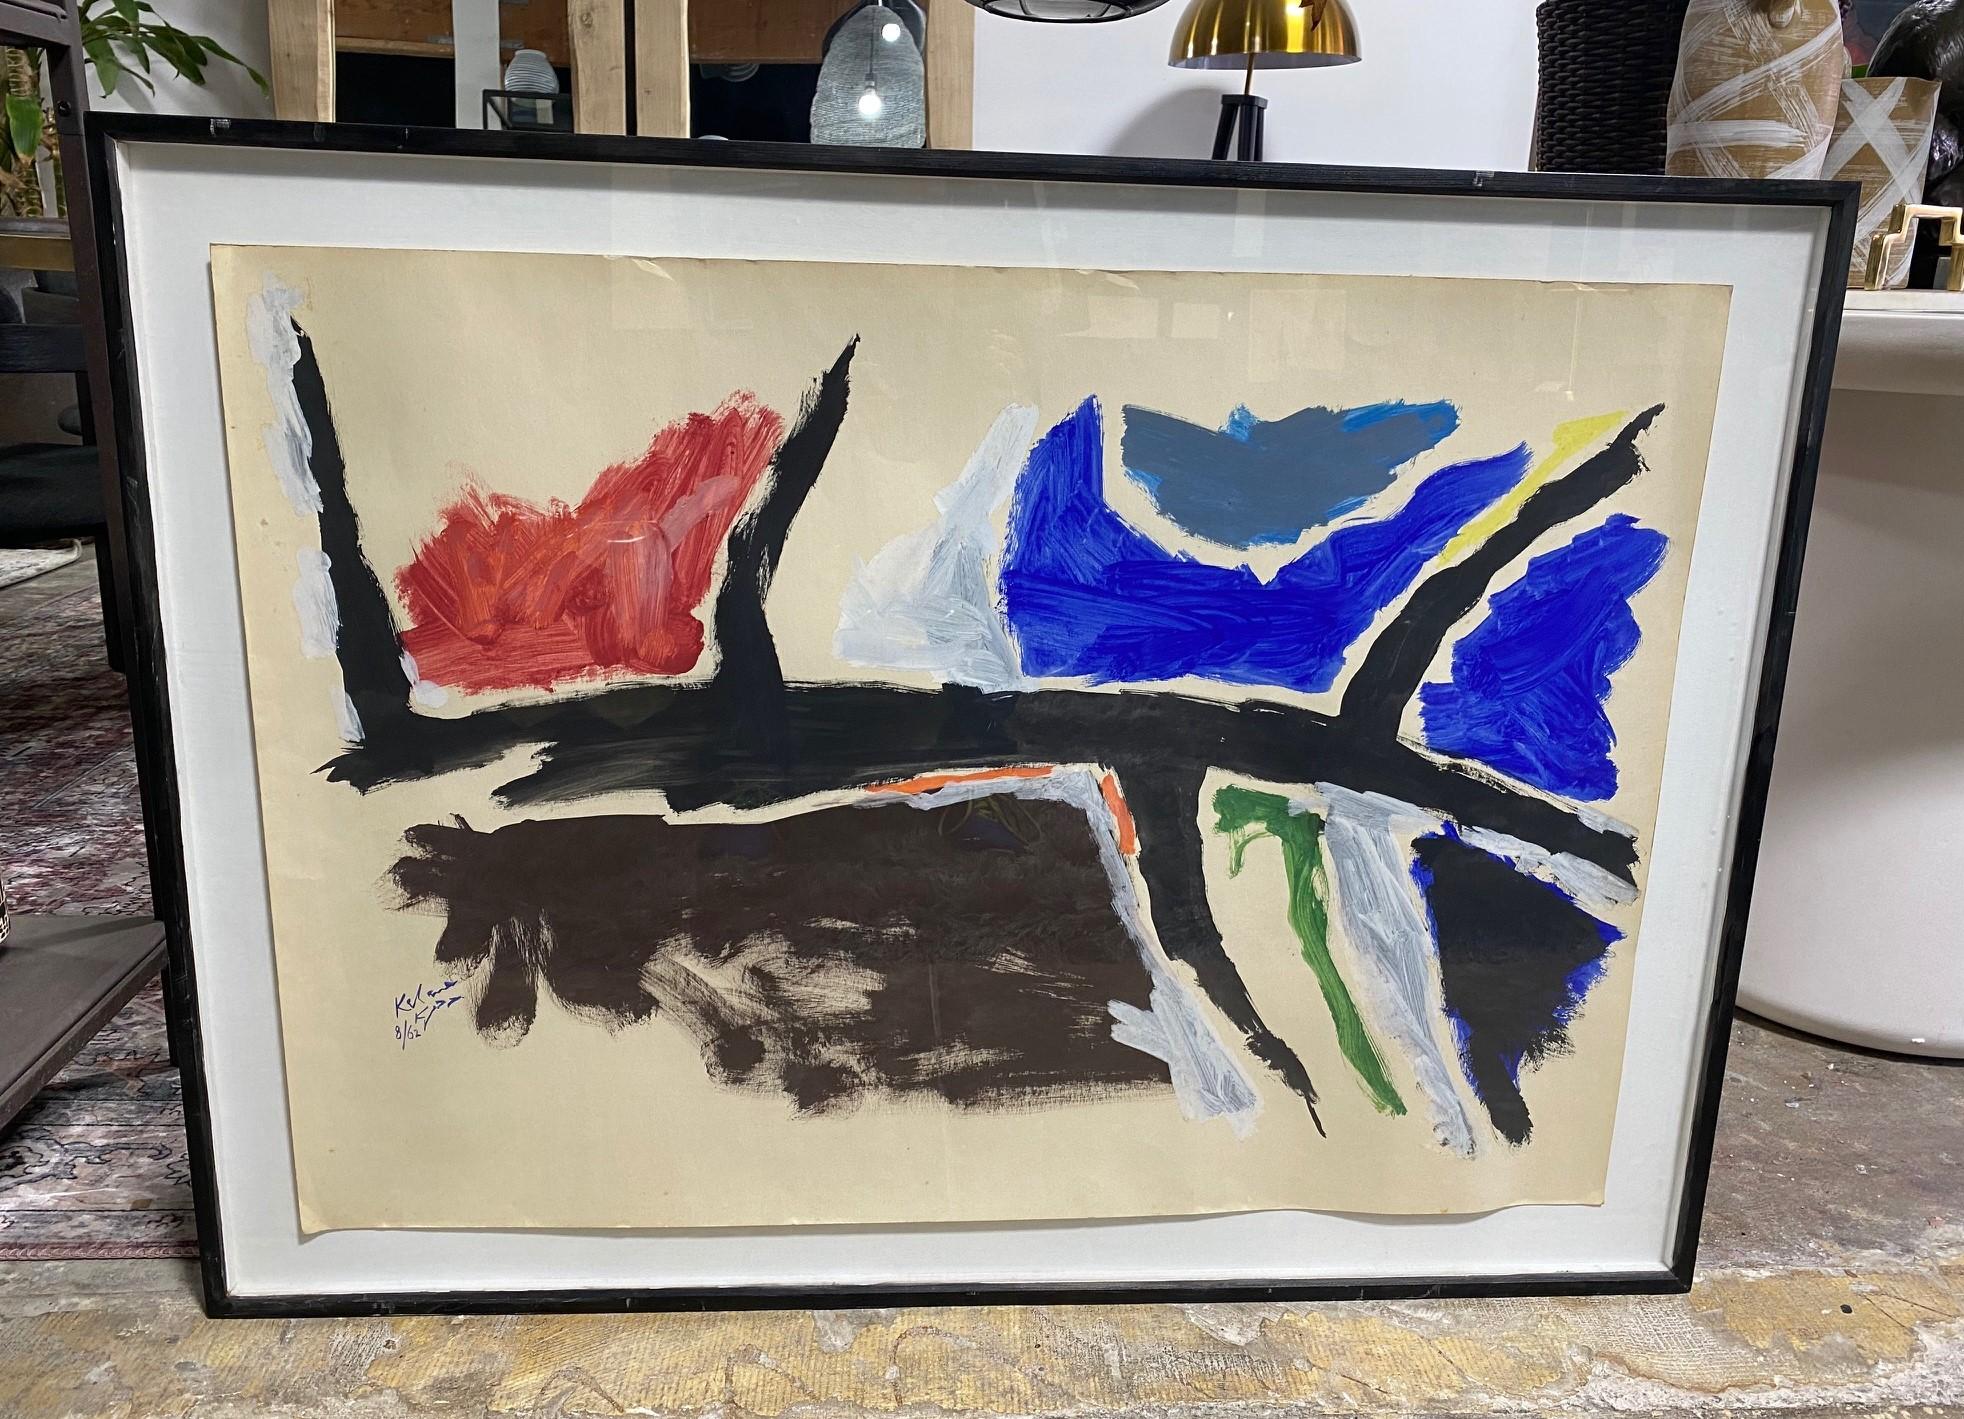 A fantastic original Mid-Century Modern abstract gouache painting by famed Israeli painter/ artist Aharon Kahana. 

Kahana was born in Stuttgart, Germany in 1905. He studied art at the Stuttgart Academy of Art from 1922 to 1925. In 1934 he